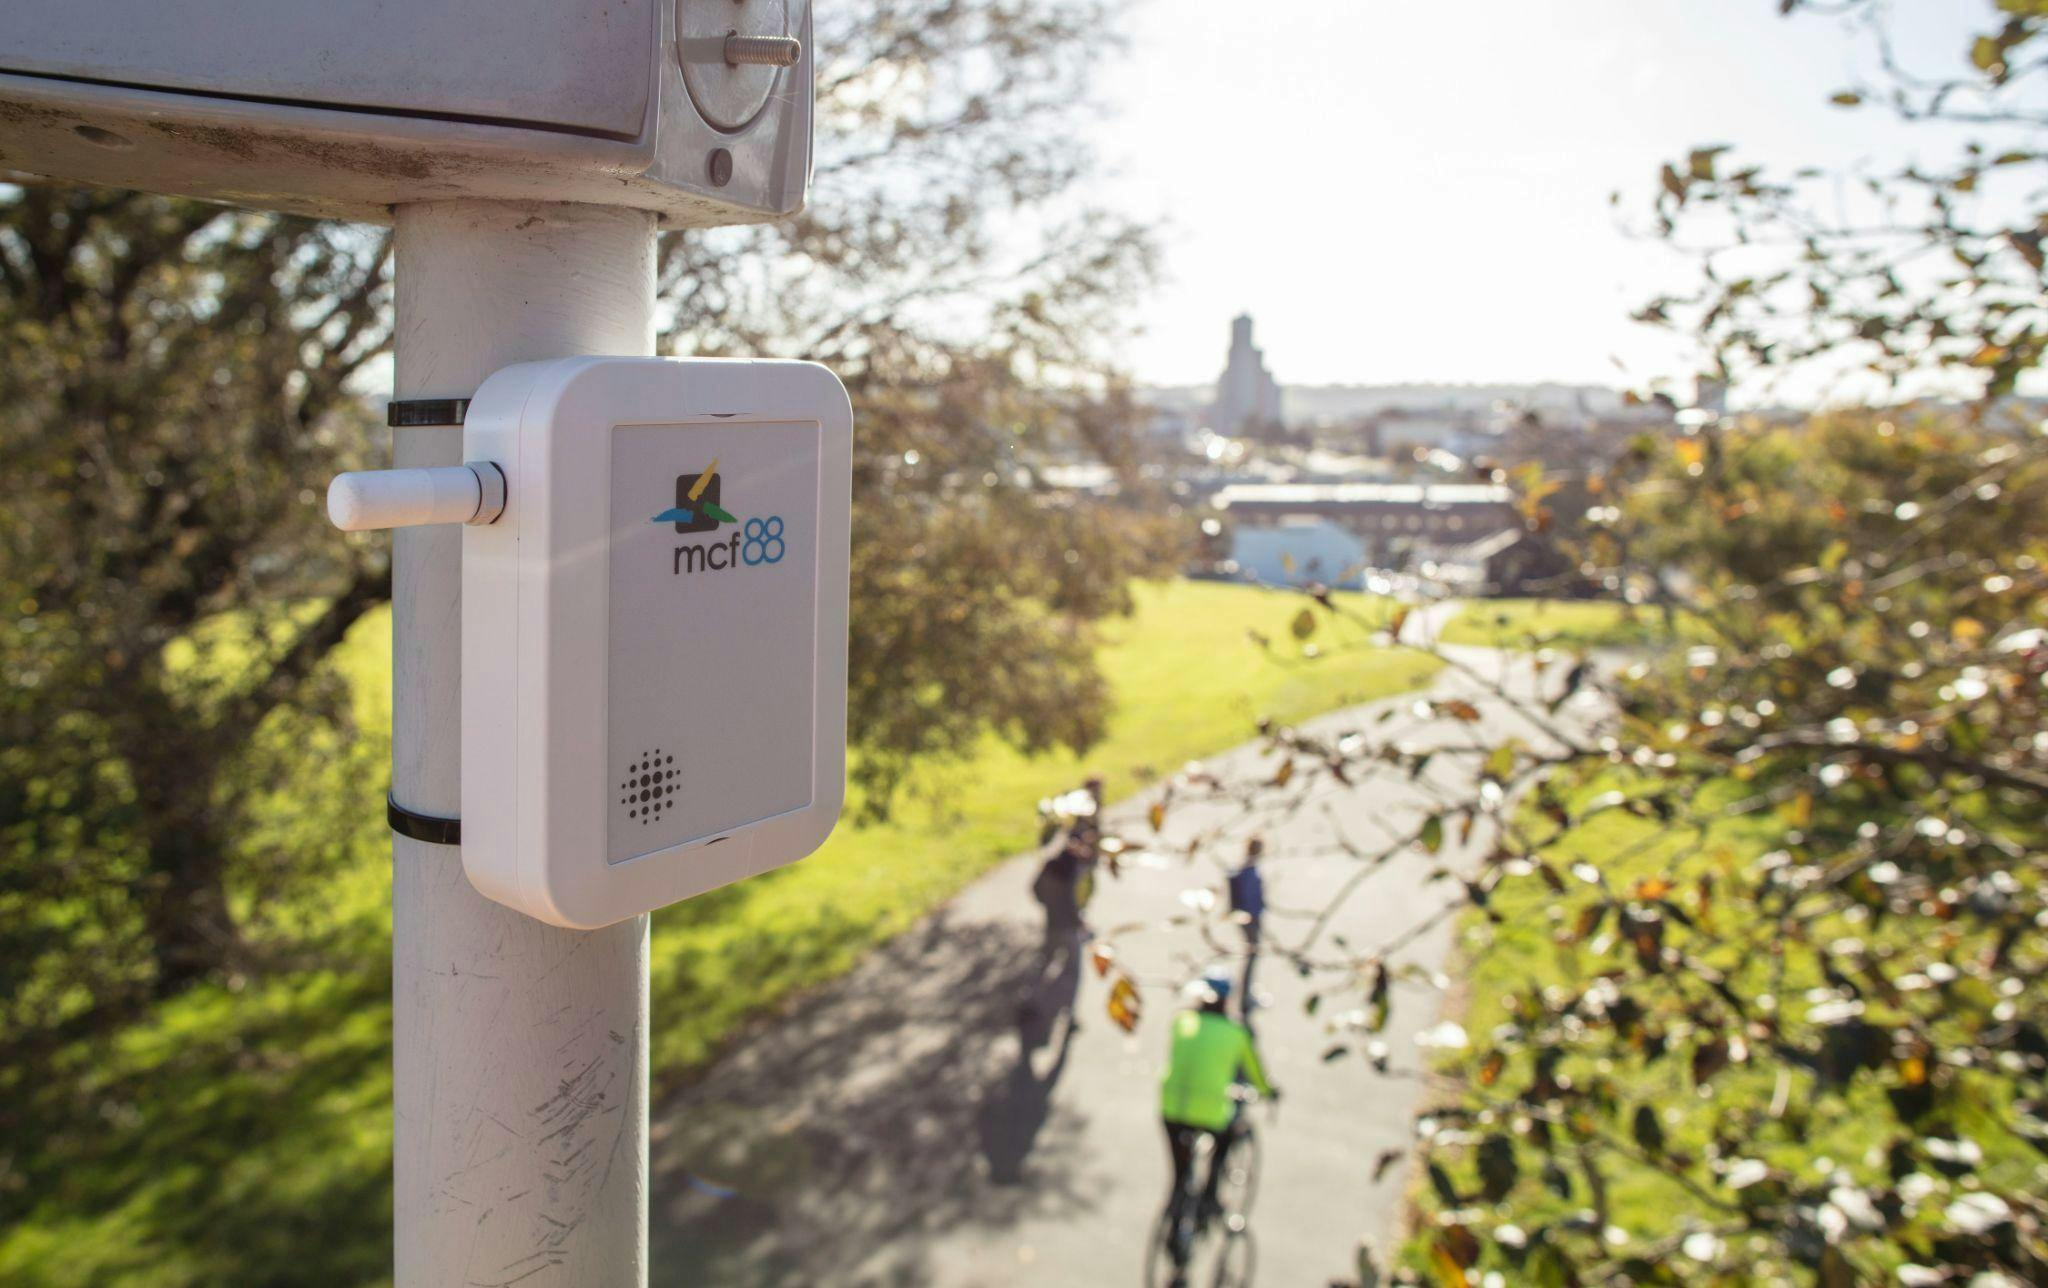 Image of an environmental park sensor high up on a pole overlooking someone riding a bicycle wearing high vis, a couple other people walking and trees and a park in the background